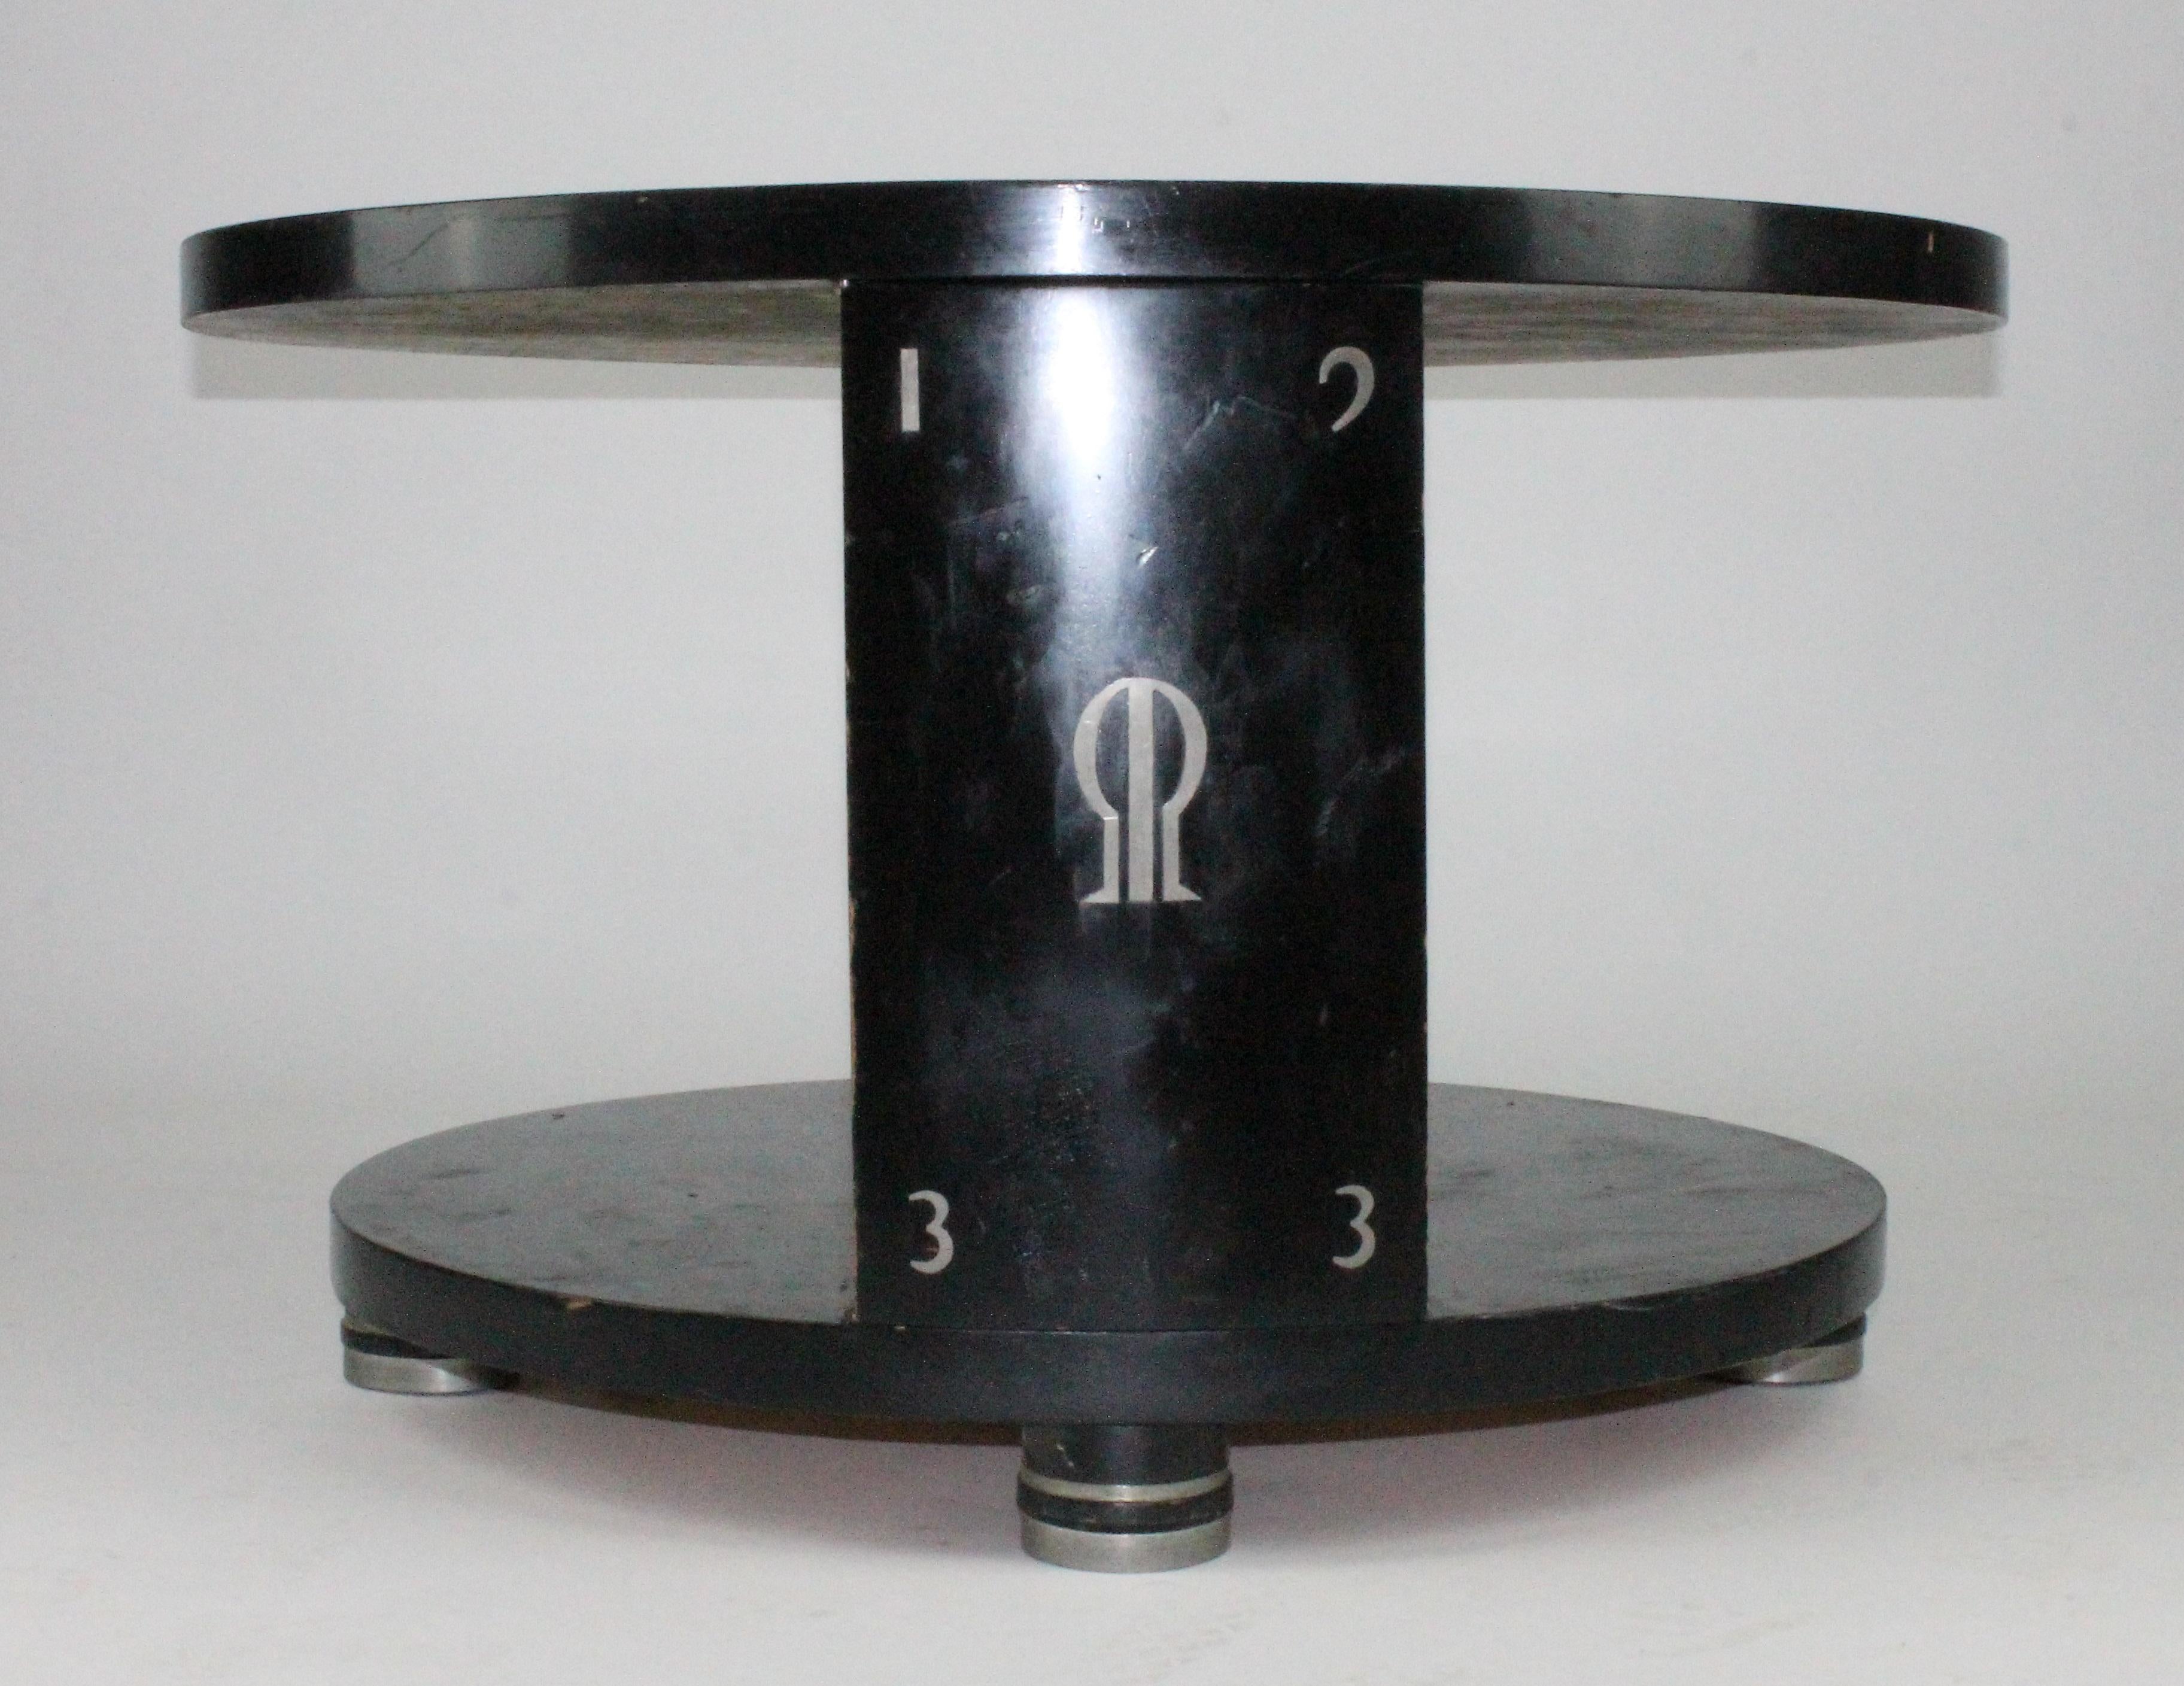 Alvar Andersson Table, 1933, Swedish, Black Painted with Pewter Inlays 5